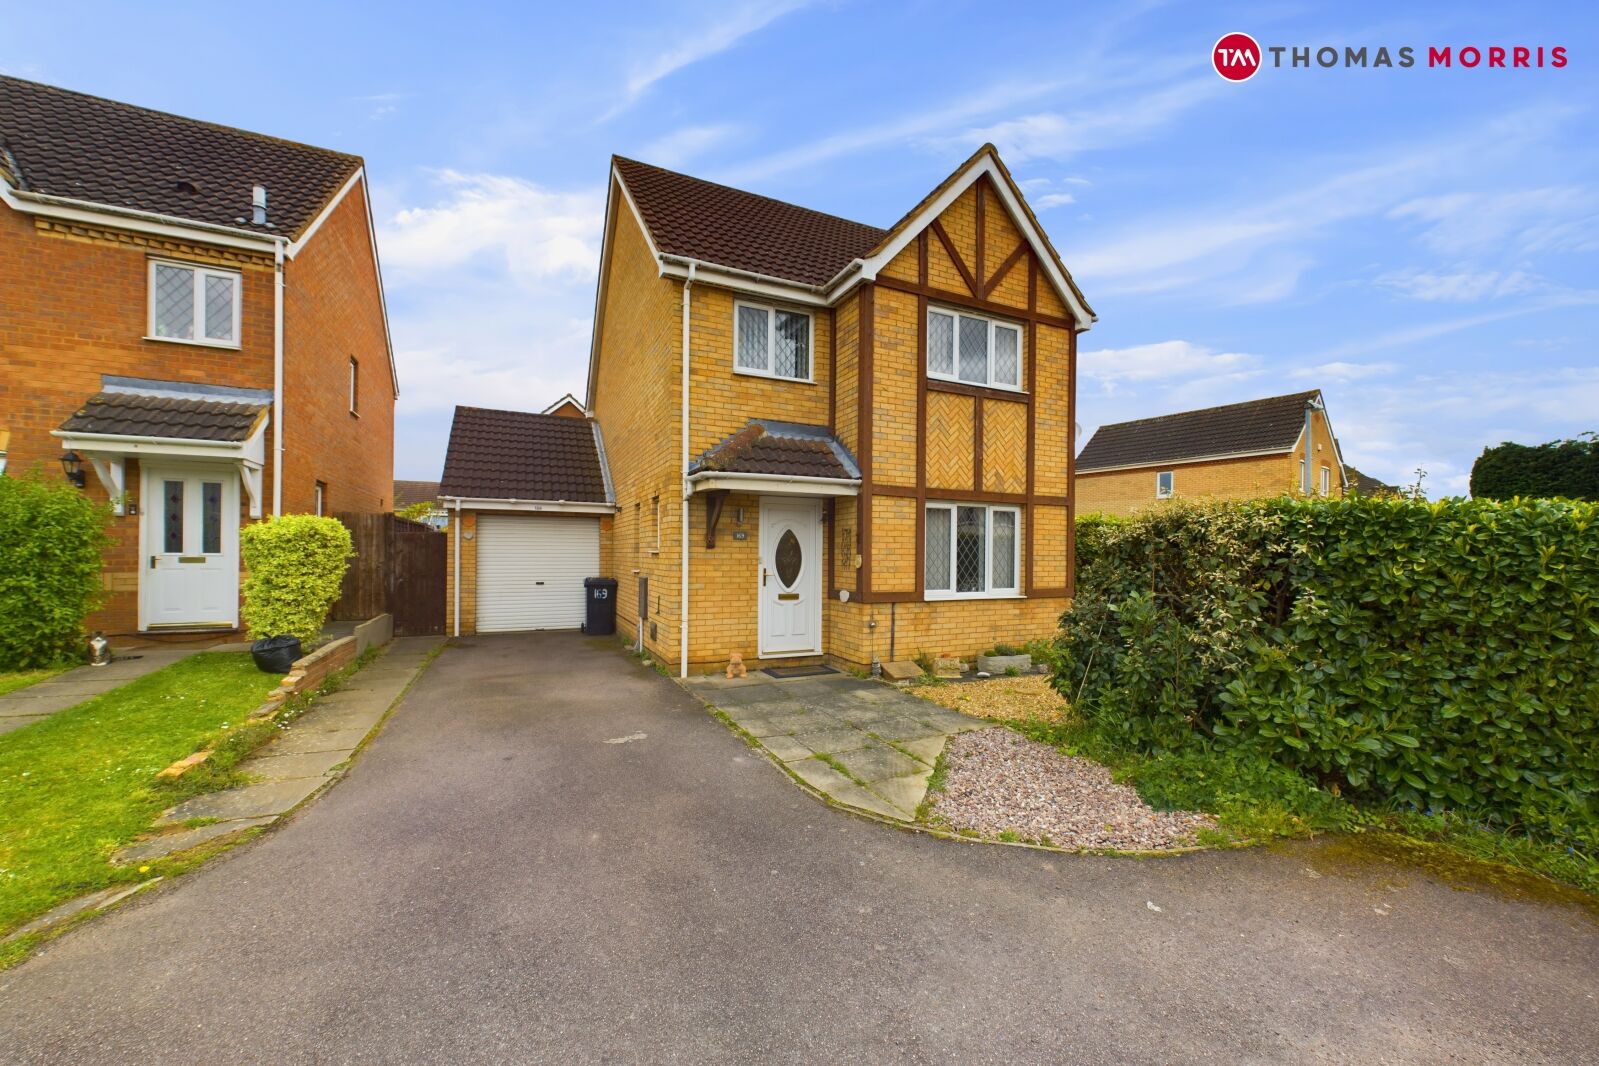 3 bedroom detached house for sale Hitchin Street, Biggleswade, SG18, main image